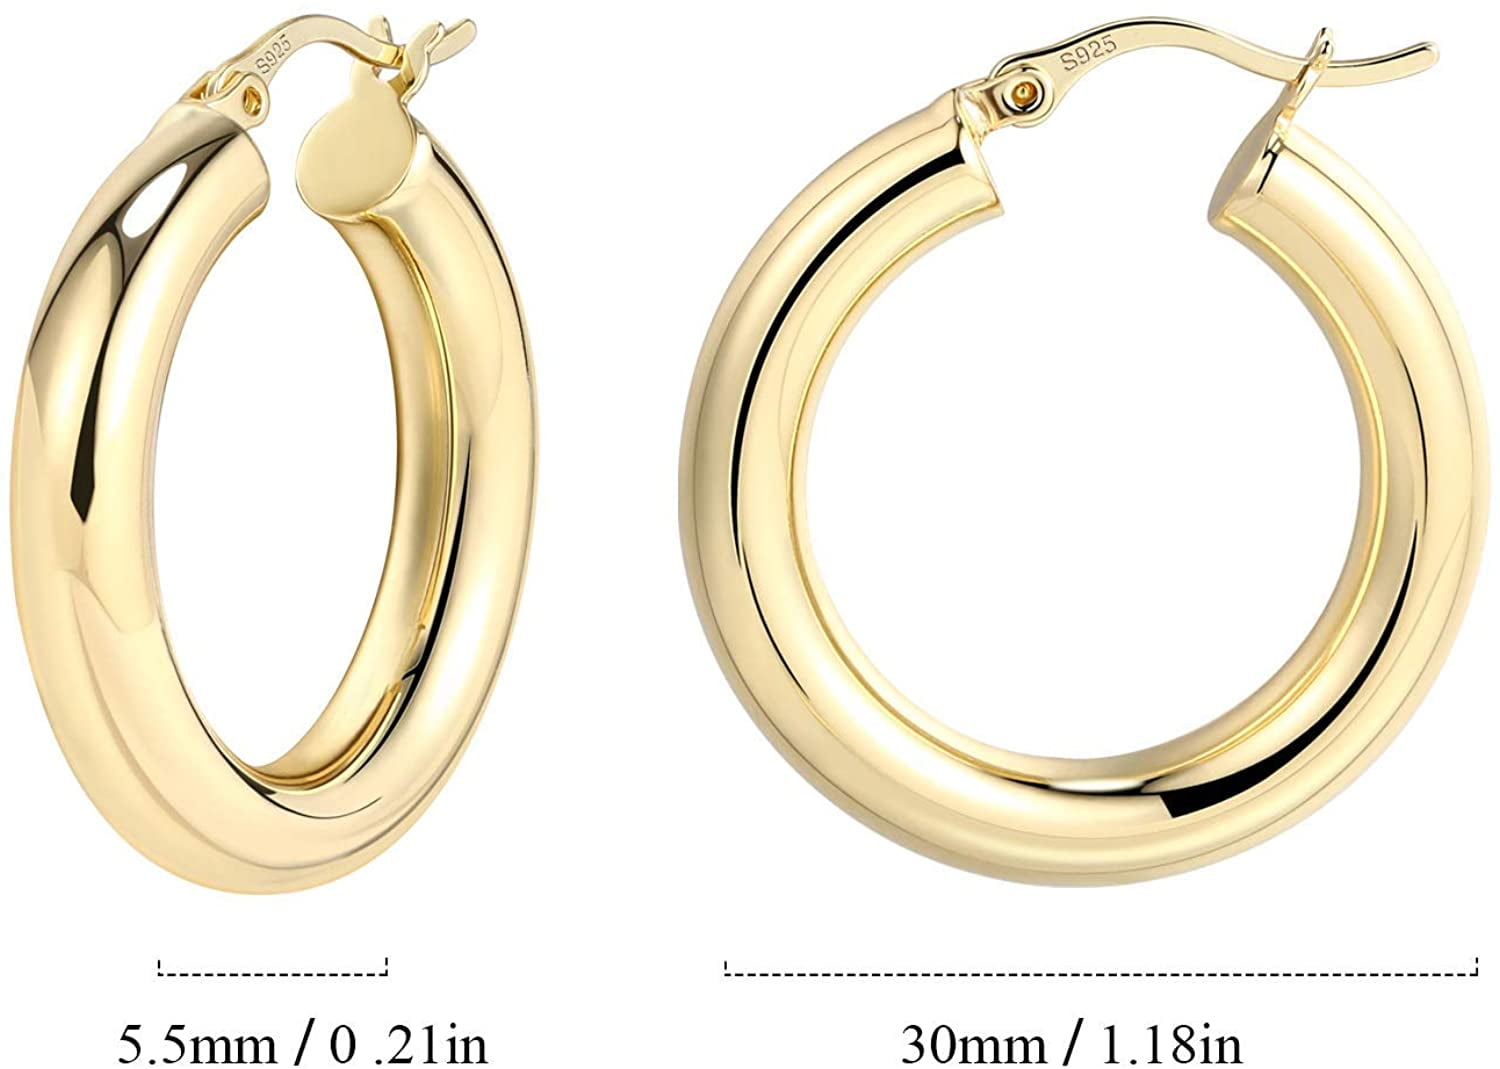 Hoop Earrings for Women Classic Thick Shiny Polished Round-Tube Chunky Hoop Earrings with 925 Sterling Silver Post for Women Girls Gift